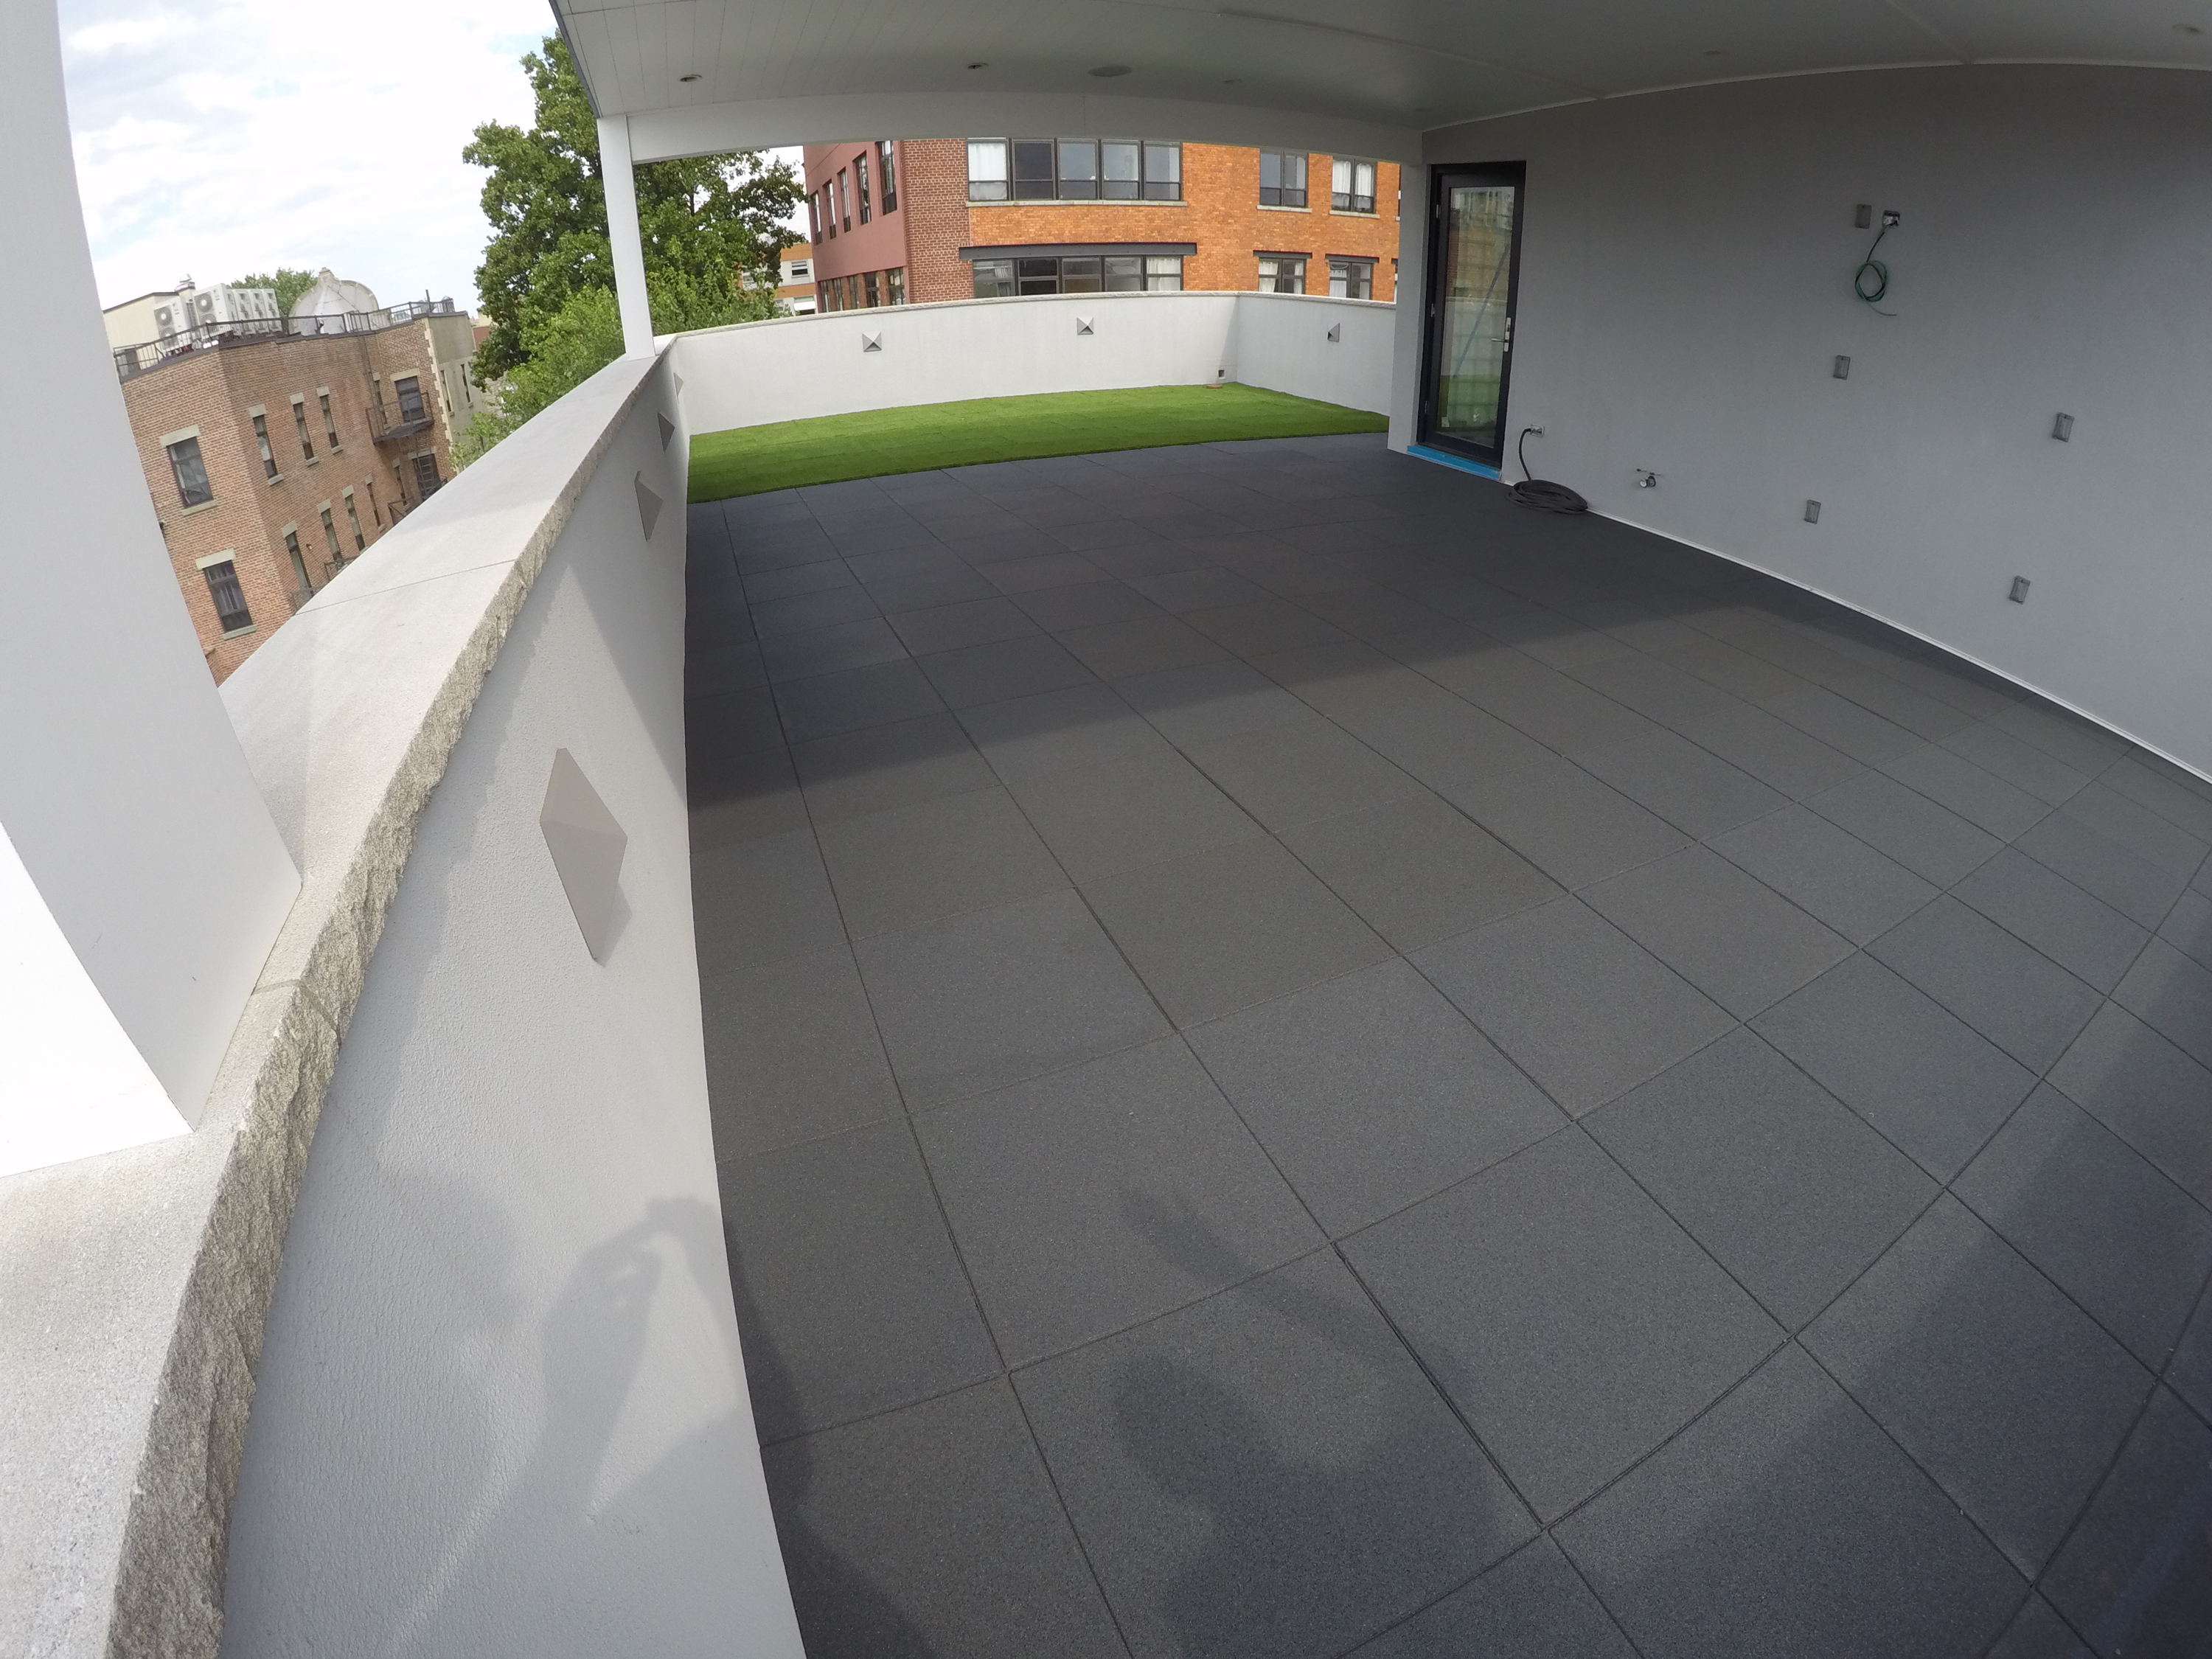 UNITY - Turf Top Tile and our Std Rubber Paver on Rooftop Patio in NYC